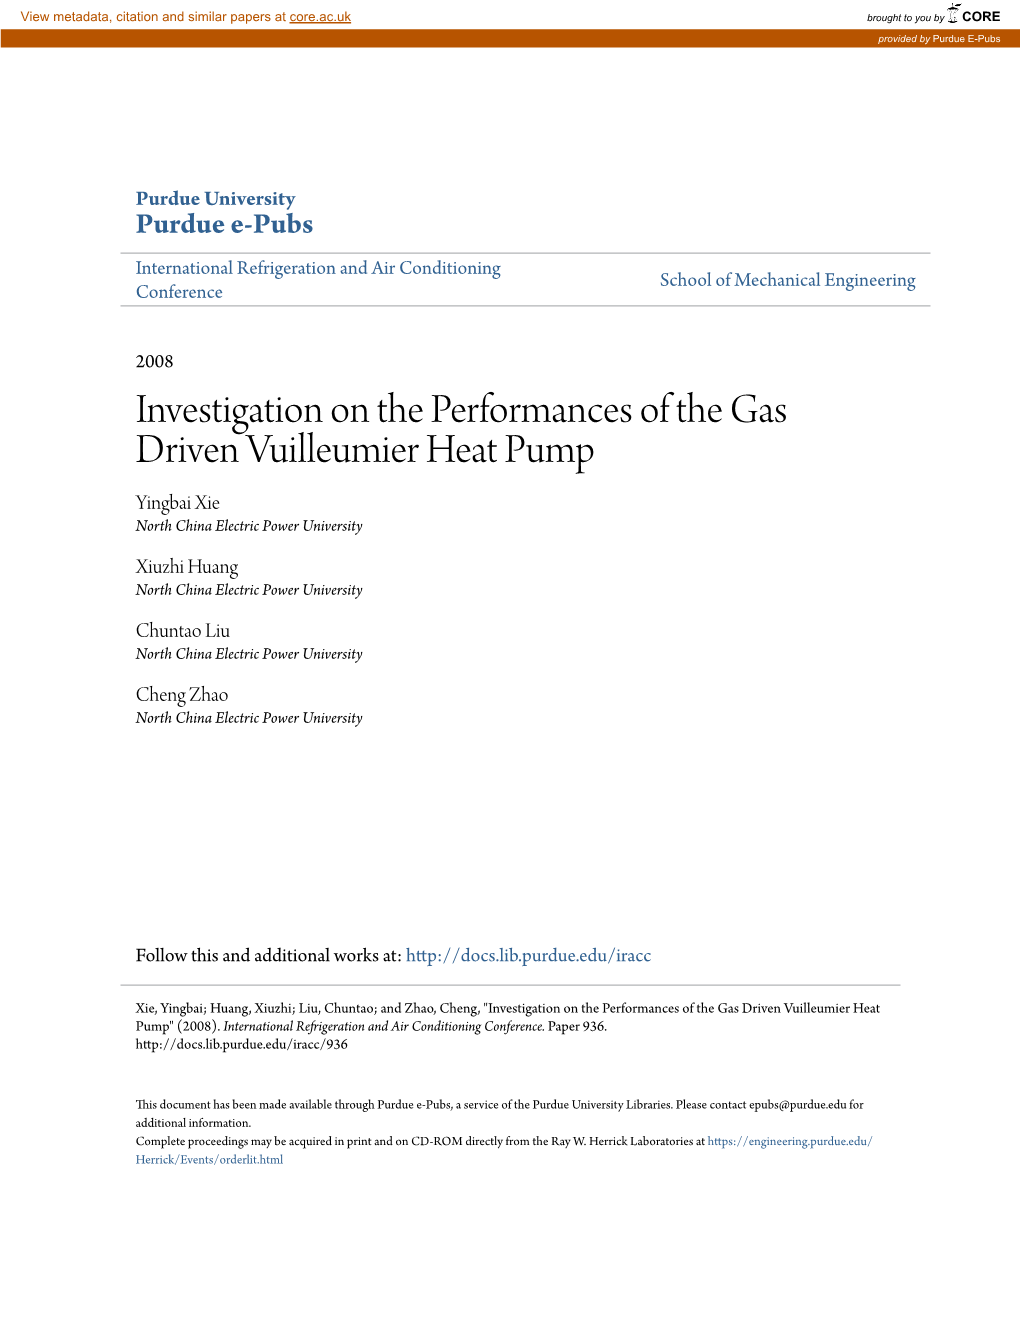 Investigation on the Performances of the Gas Driven Vuilleumier Heat Pump Yingbai Xie North China Electric Power University